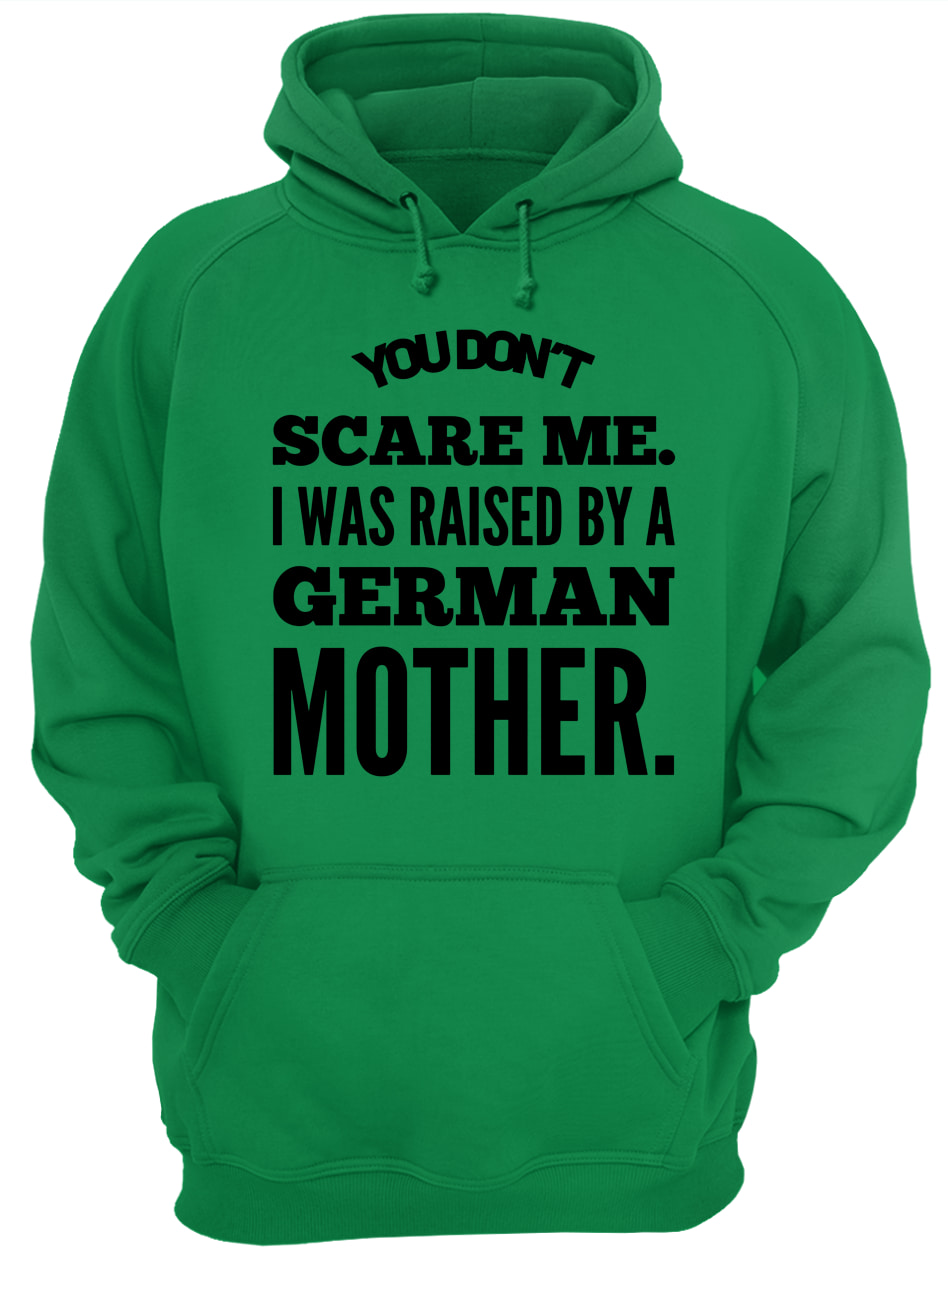 You don't scare me I was raised by a german mother hoodie